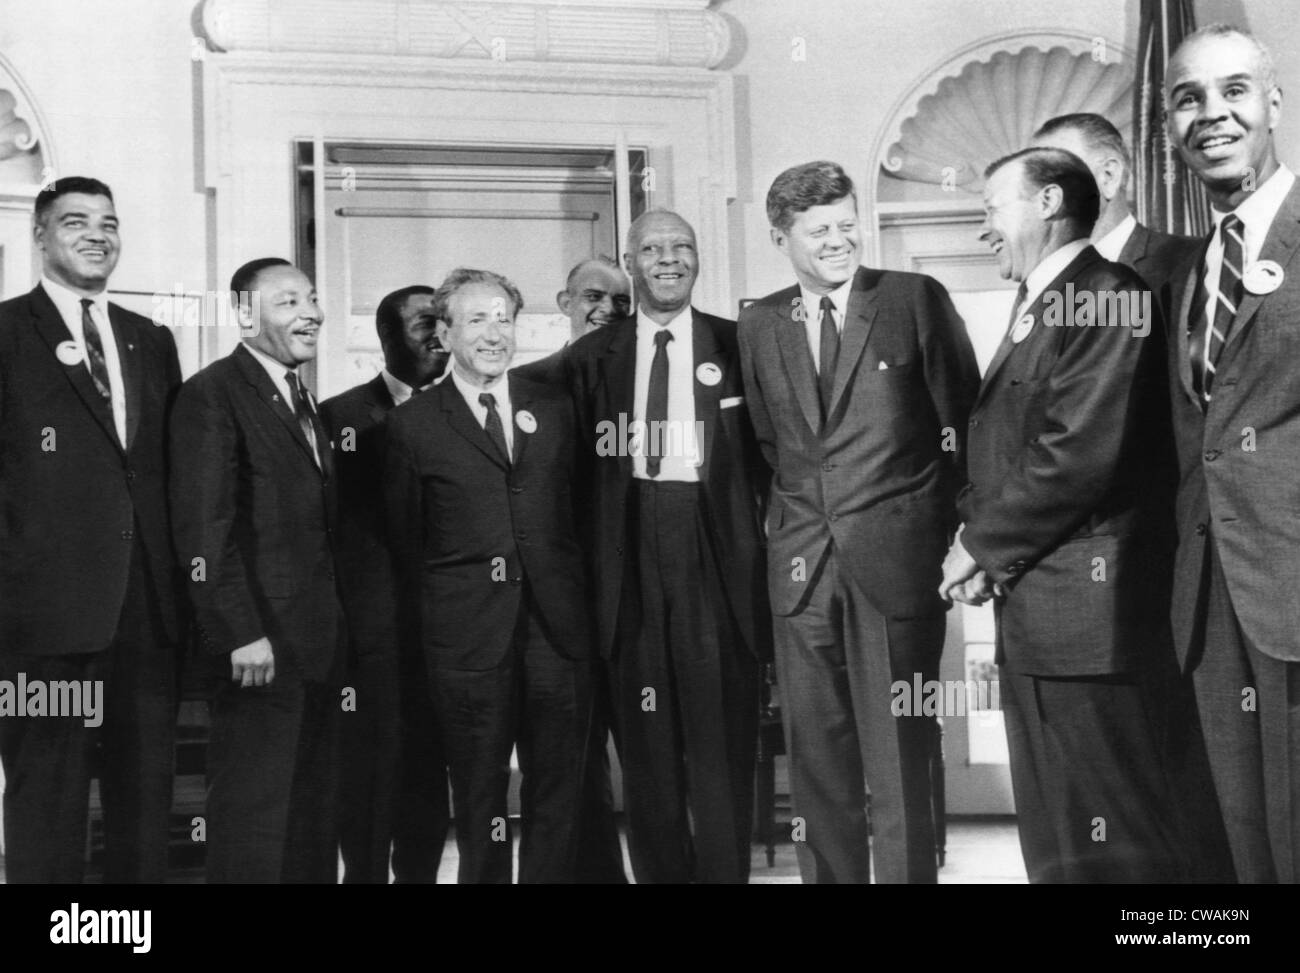 Vordere Reihe, L-r: Whitney Young, Martin Luther King, Rabbiner Joachim Prinz, A. Philip Randolph, Kennedy, Walter Reuther, Stockfoto